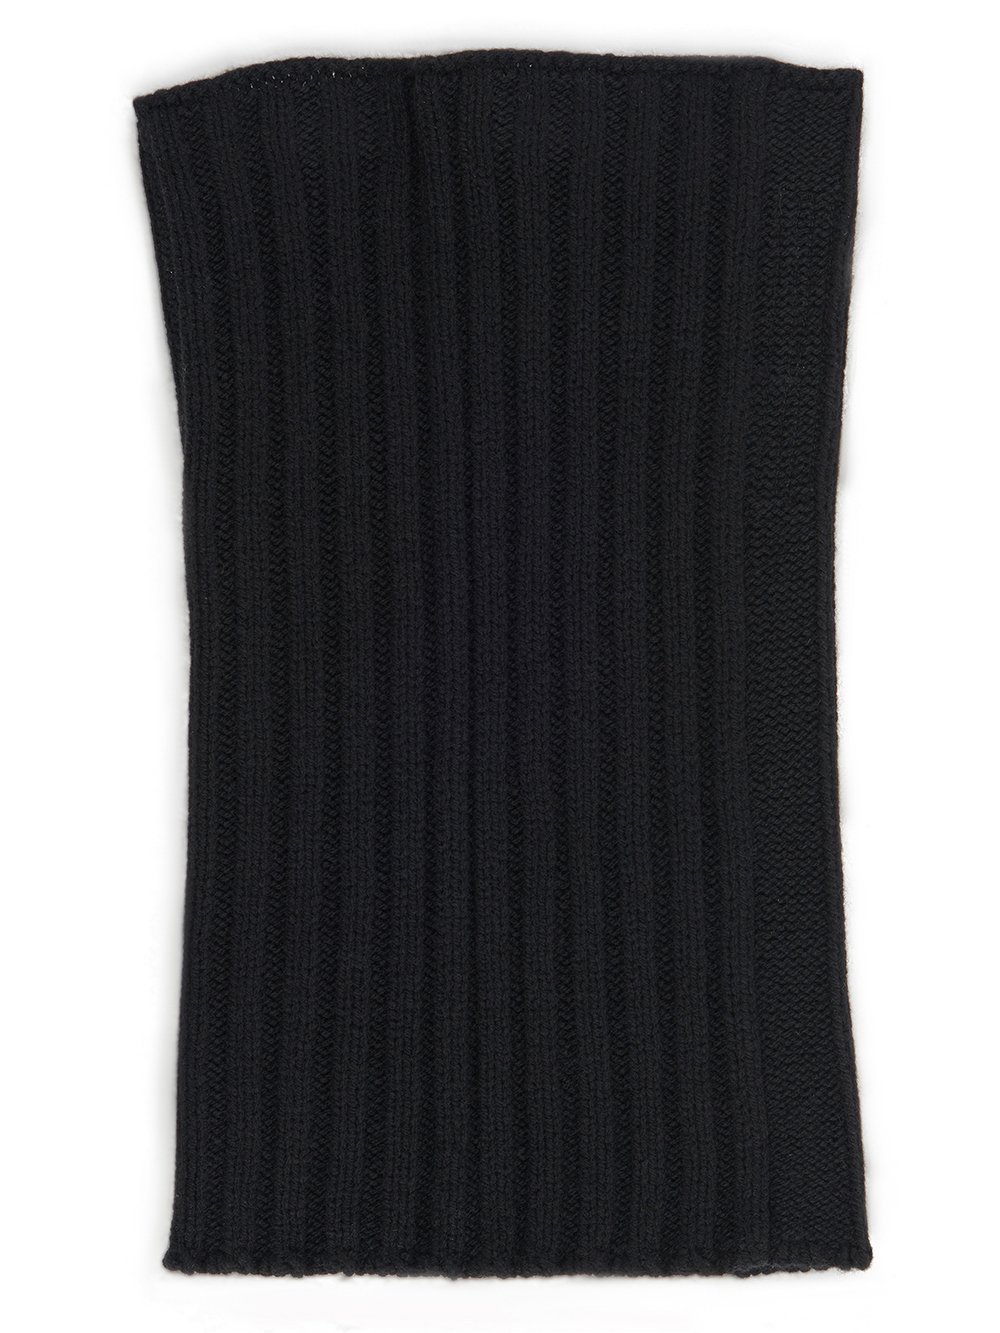 RICK OWENS FW23 LUXOR TUBE SCARF IN BLACK  RECYCLED CASHMERE KNIT